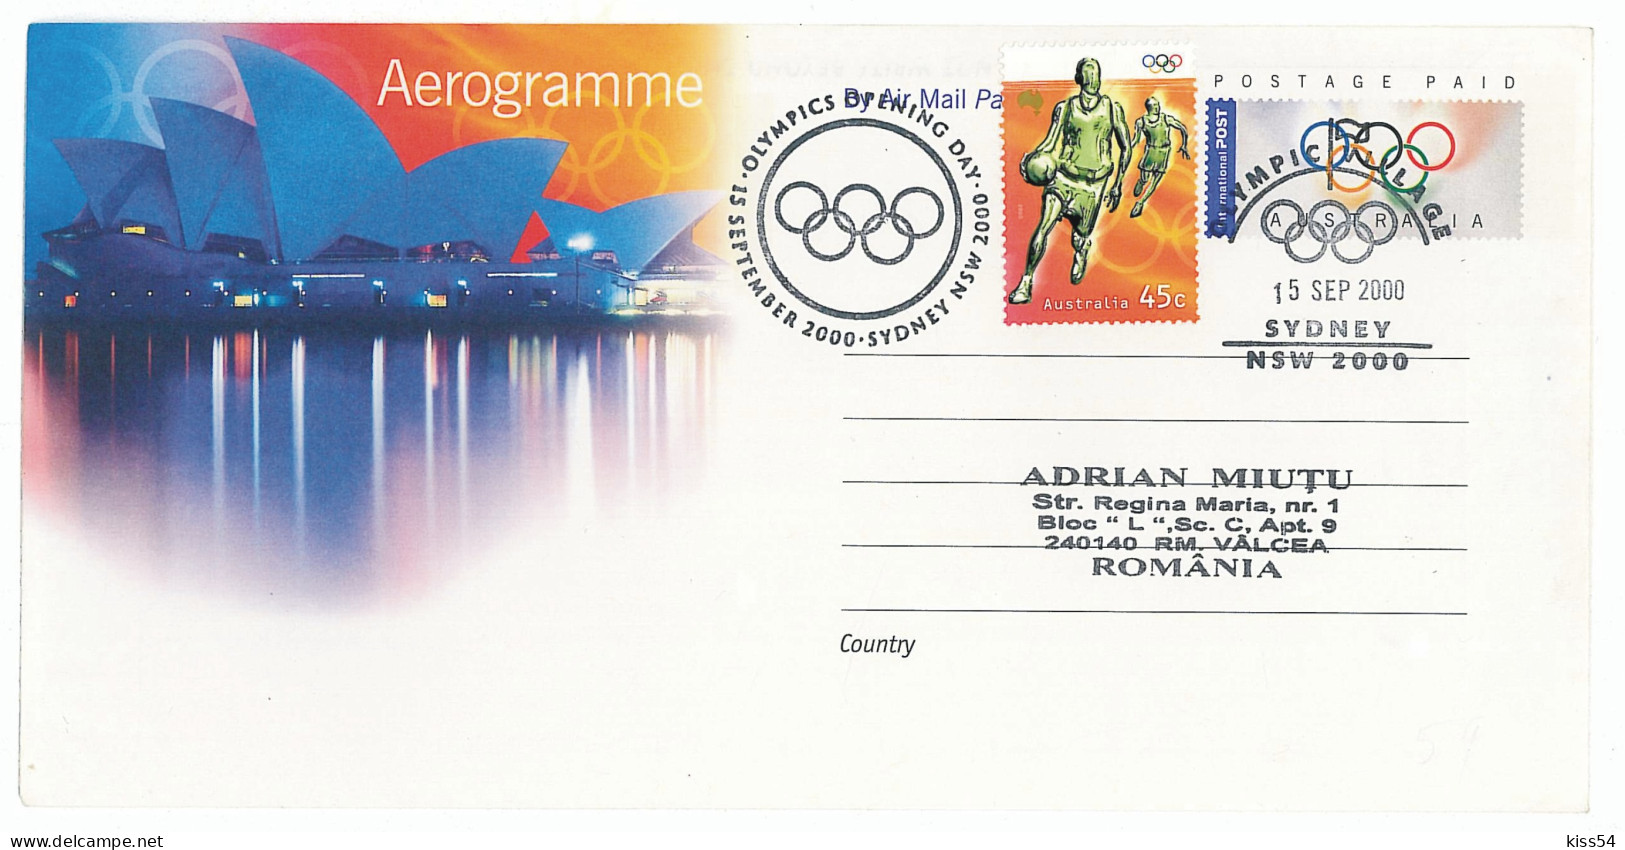 CV 29 - 1086 SYDNEY Olimpic Games, Bascketball - Aerogramme Cover - Used - 2000 - Lettres & Documents